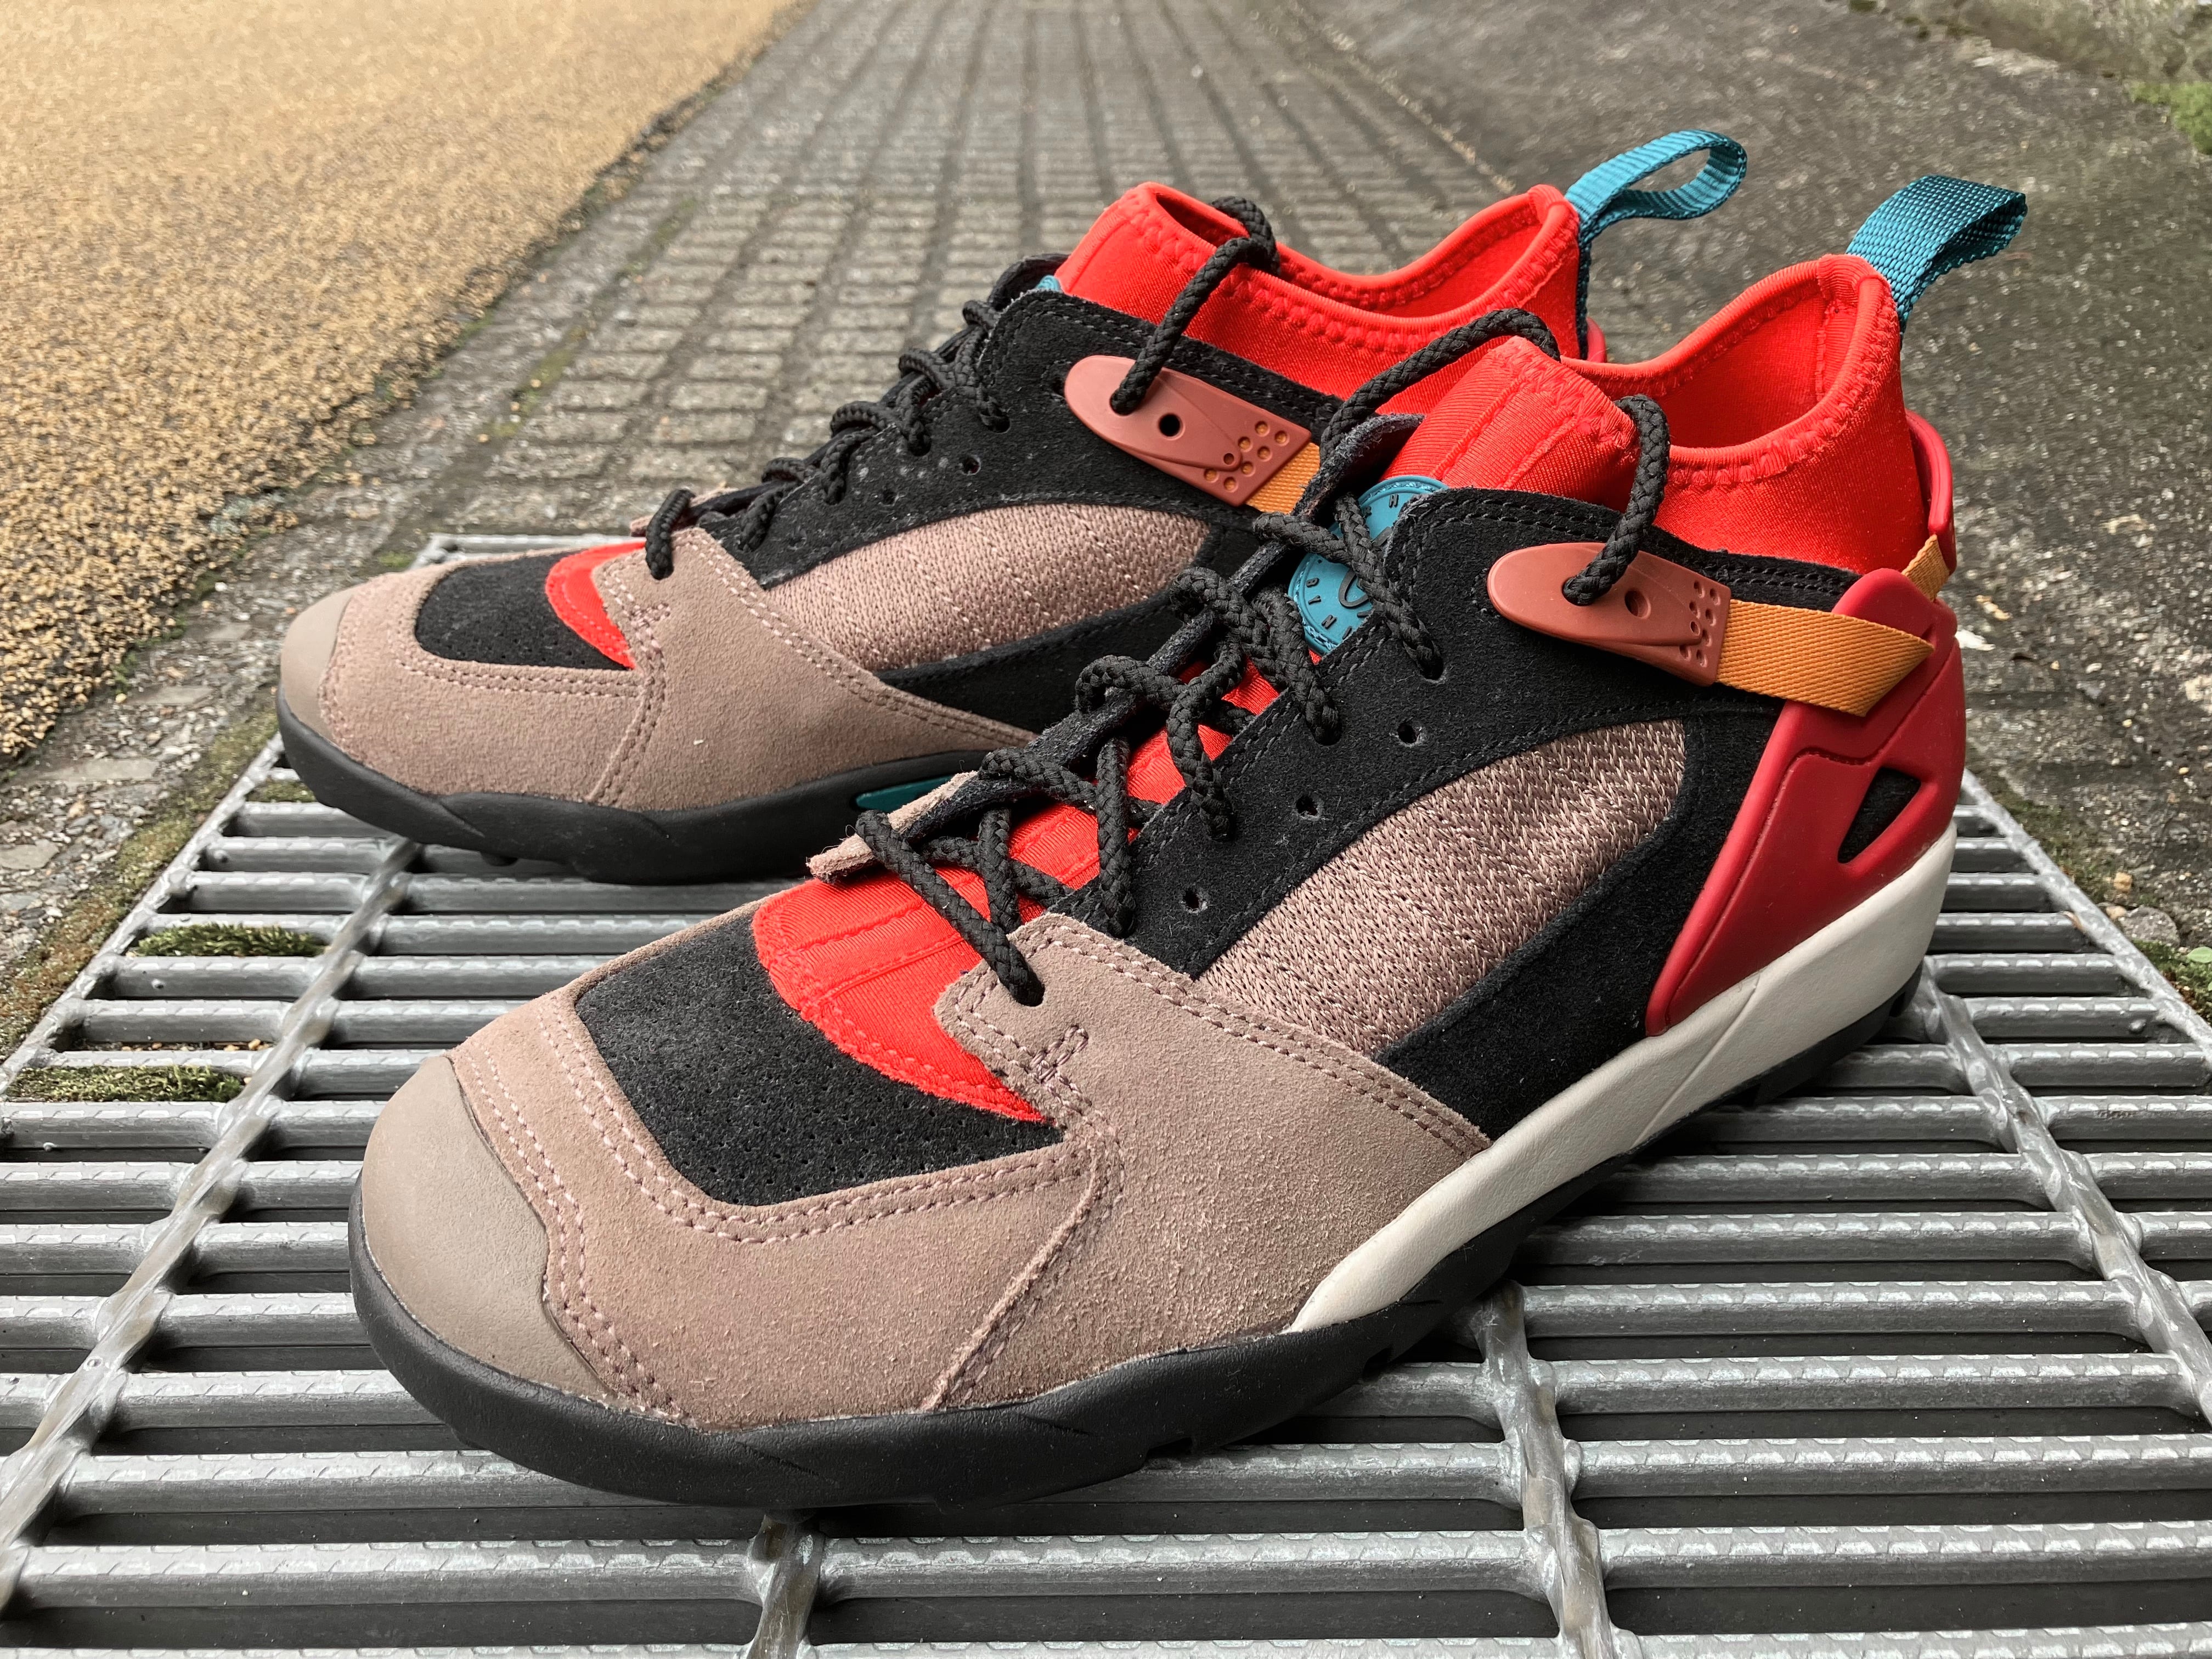 Alice Zus tent NIKE AIR REVADERCHI (GYM RED/GEODE TEAL) | "JACK OF ALL TRADES" 万屋 MARU